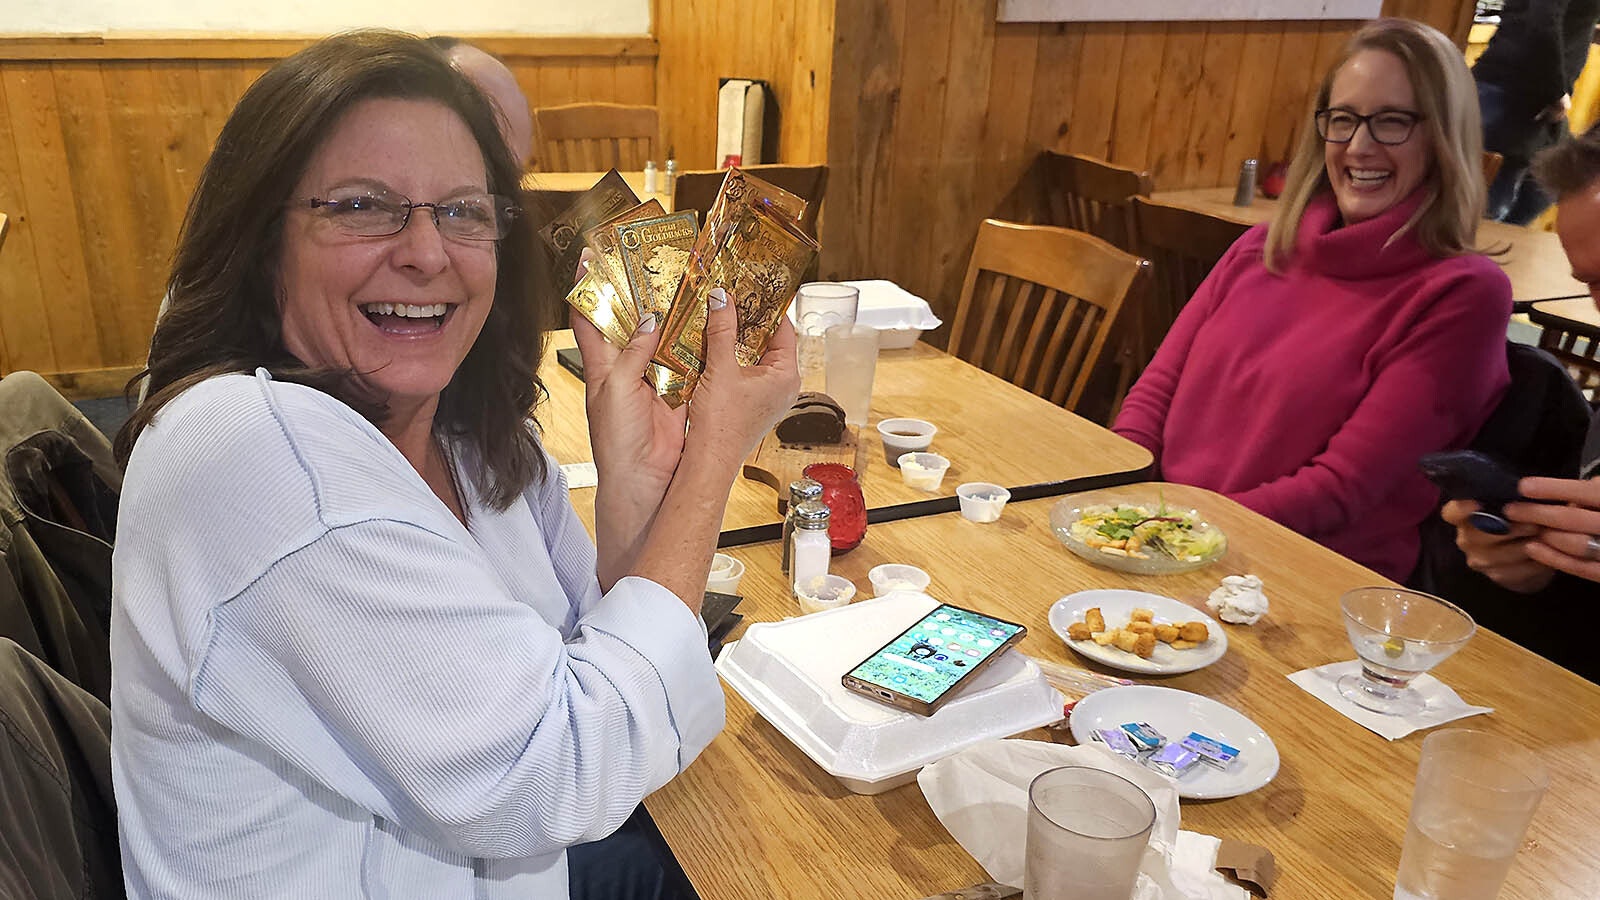 Laura Hoch holds up goldback bills she and her husband Chris intend to use to pay for their dinner at T-Joe's Steakhouse and Saloon in Cheyenne. The couple drove up all the way from Fort Collins for dinner at a place where they can spend their goldbacks.